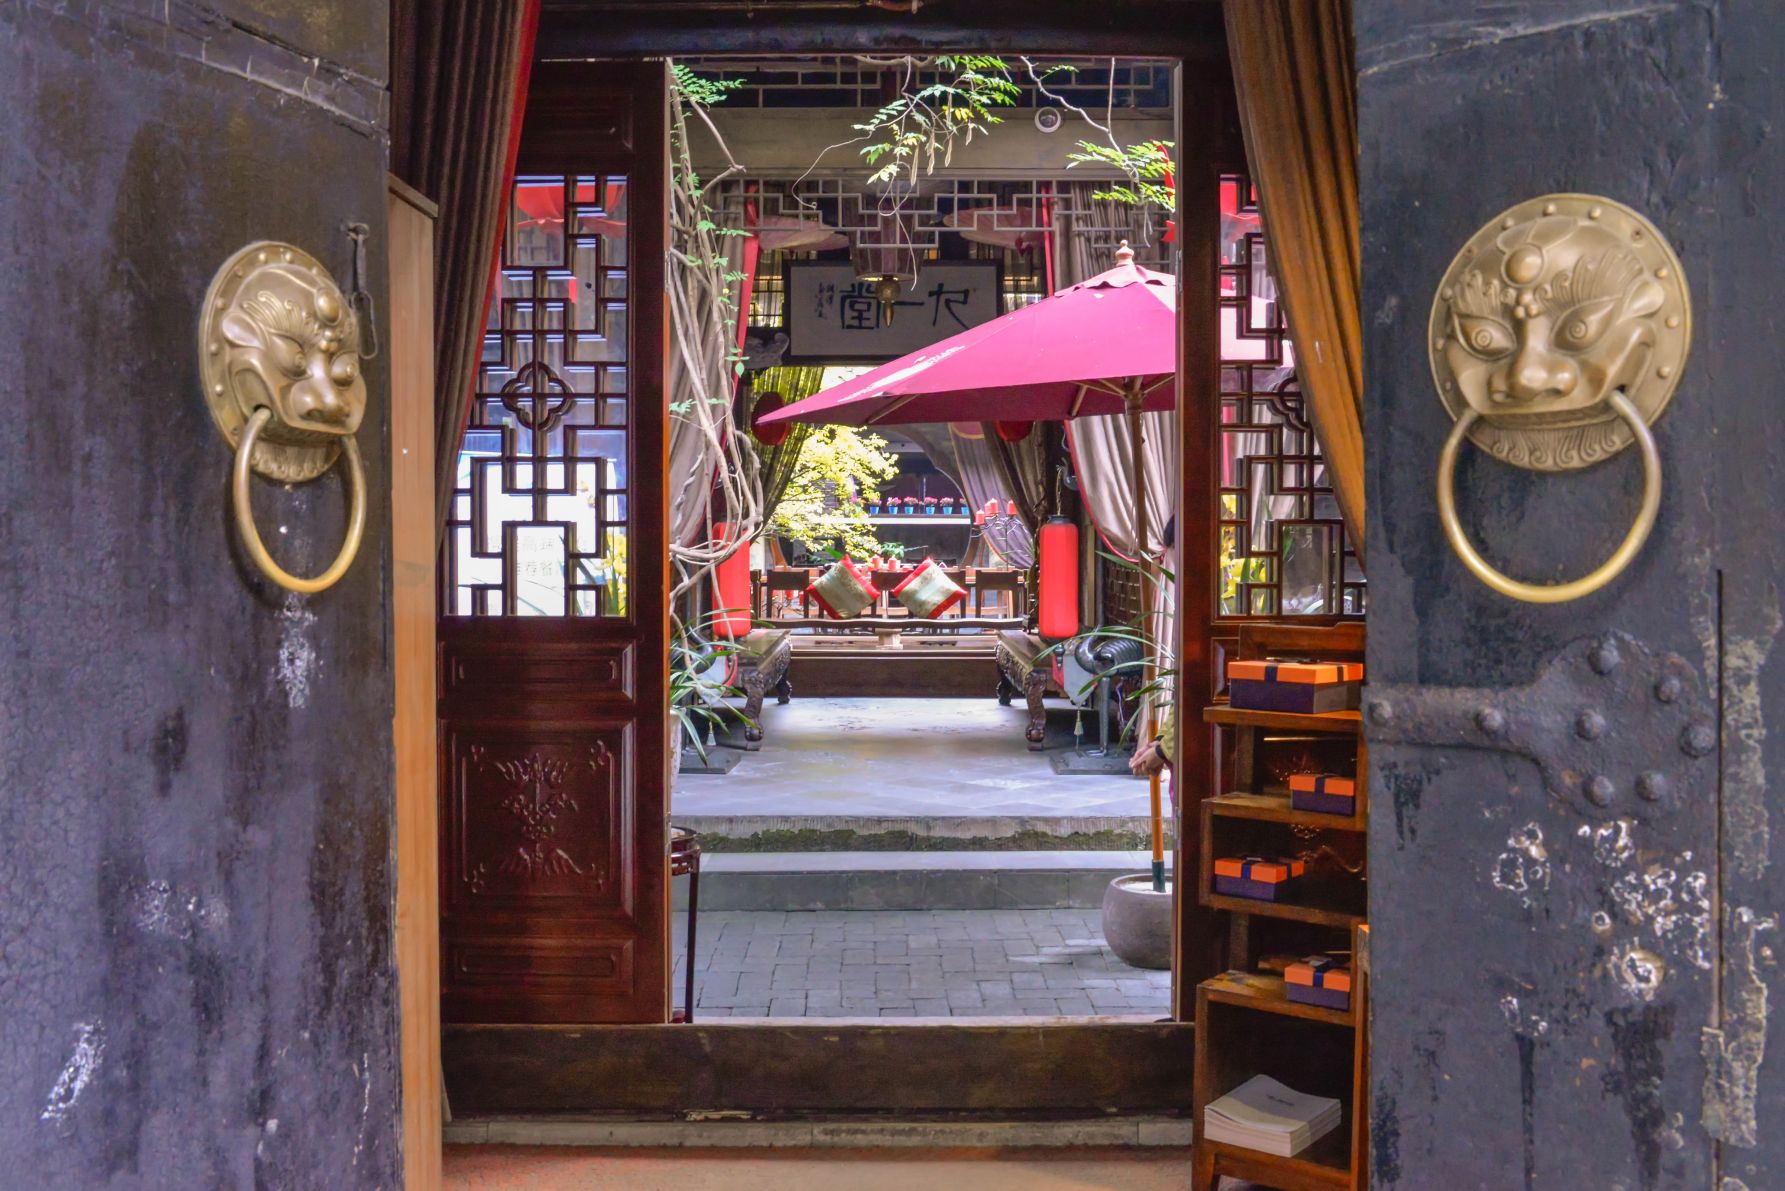 The ancient trading city of Chengdu continues to welcome visitors from across the world as it preserves its rich past while navigating the fortunes of its future.